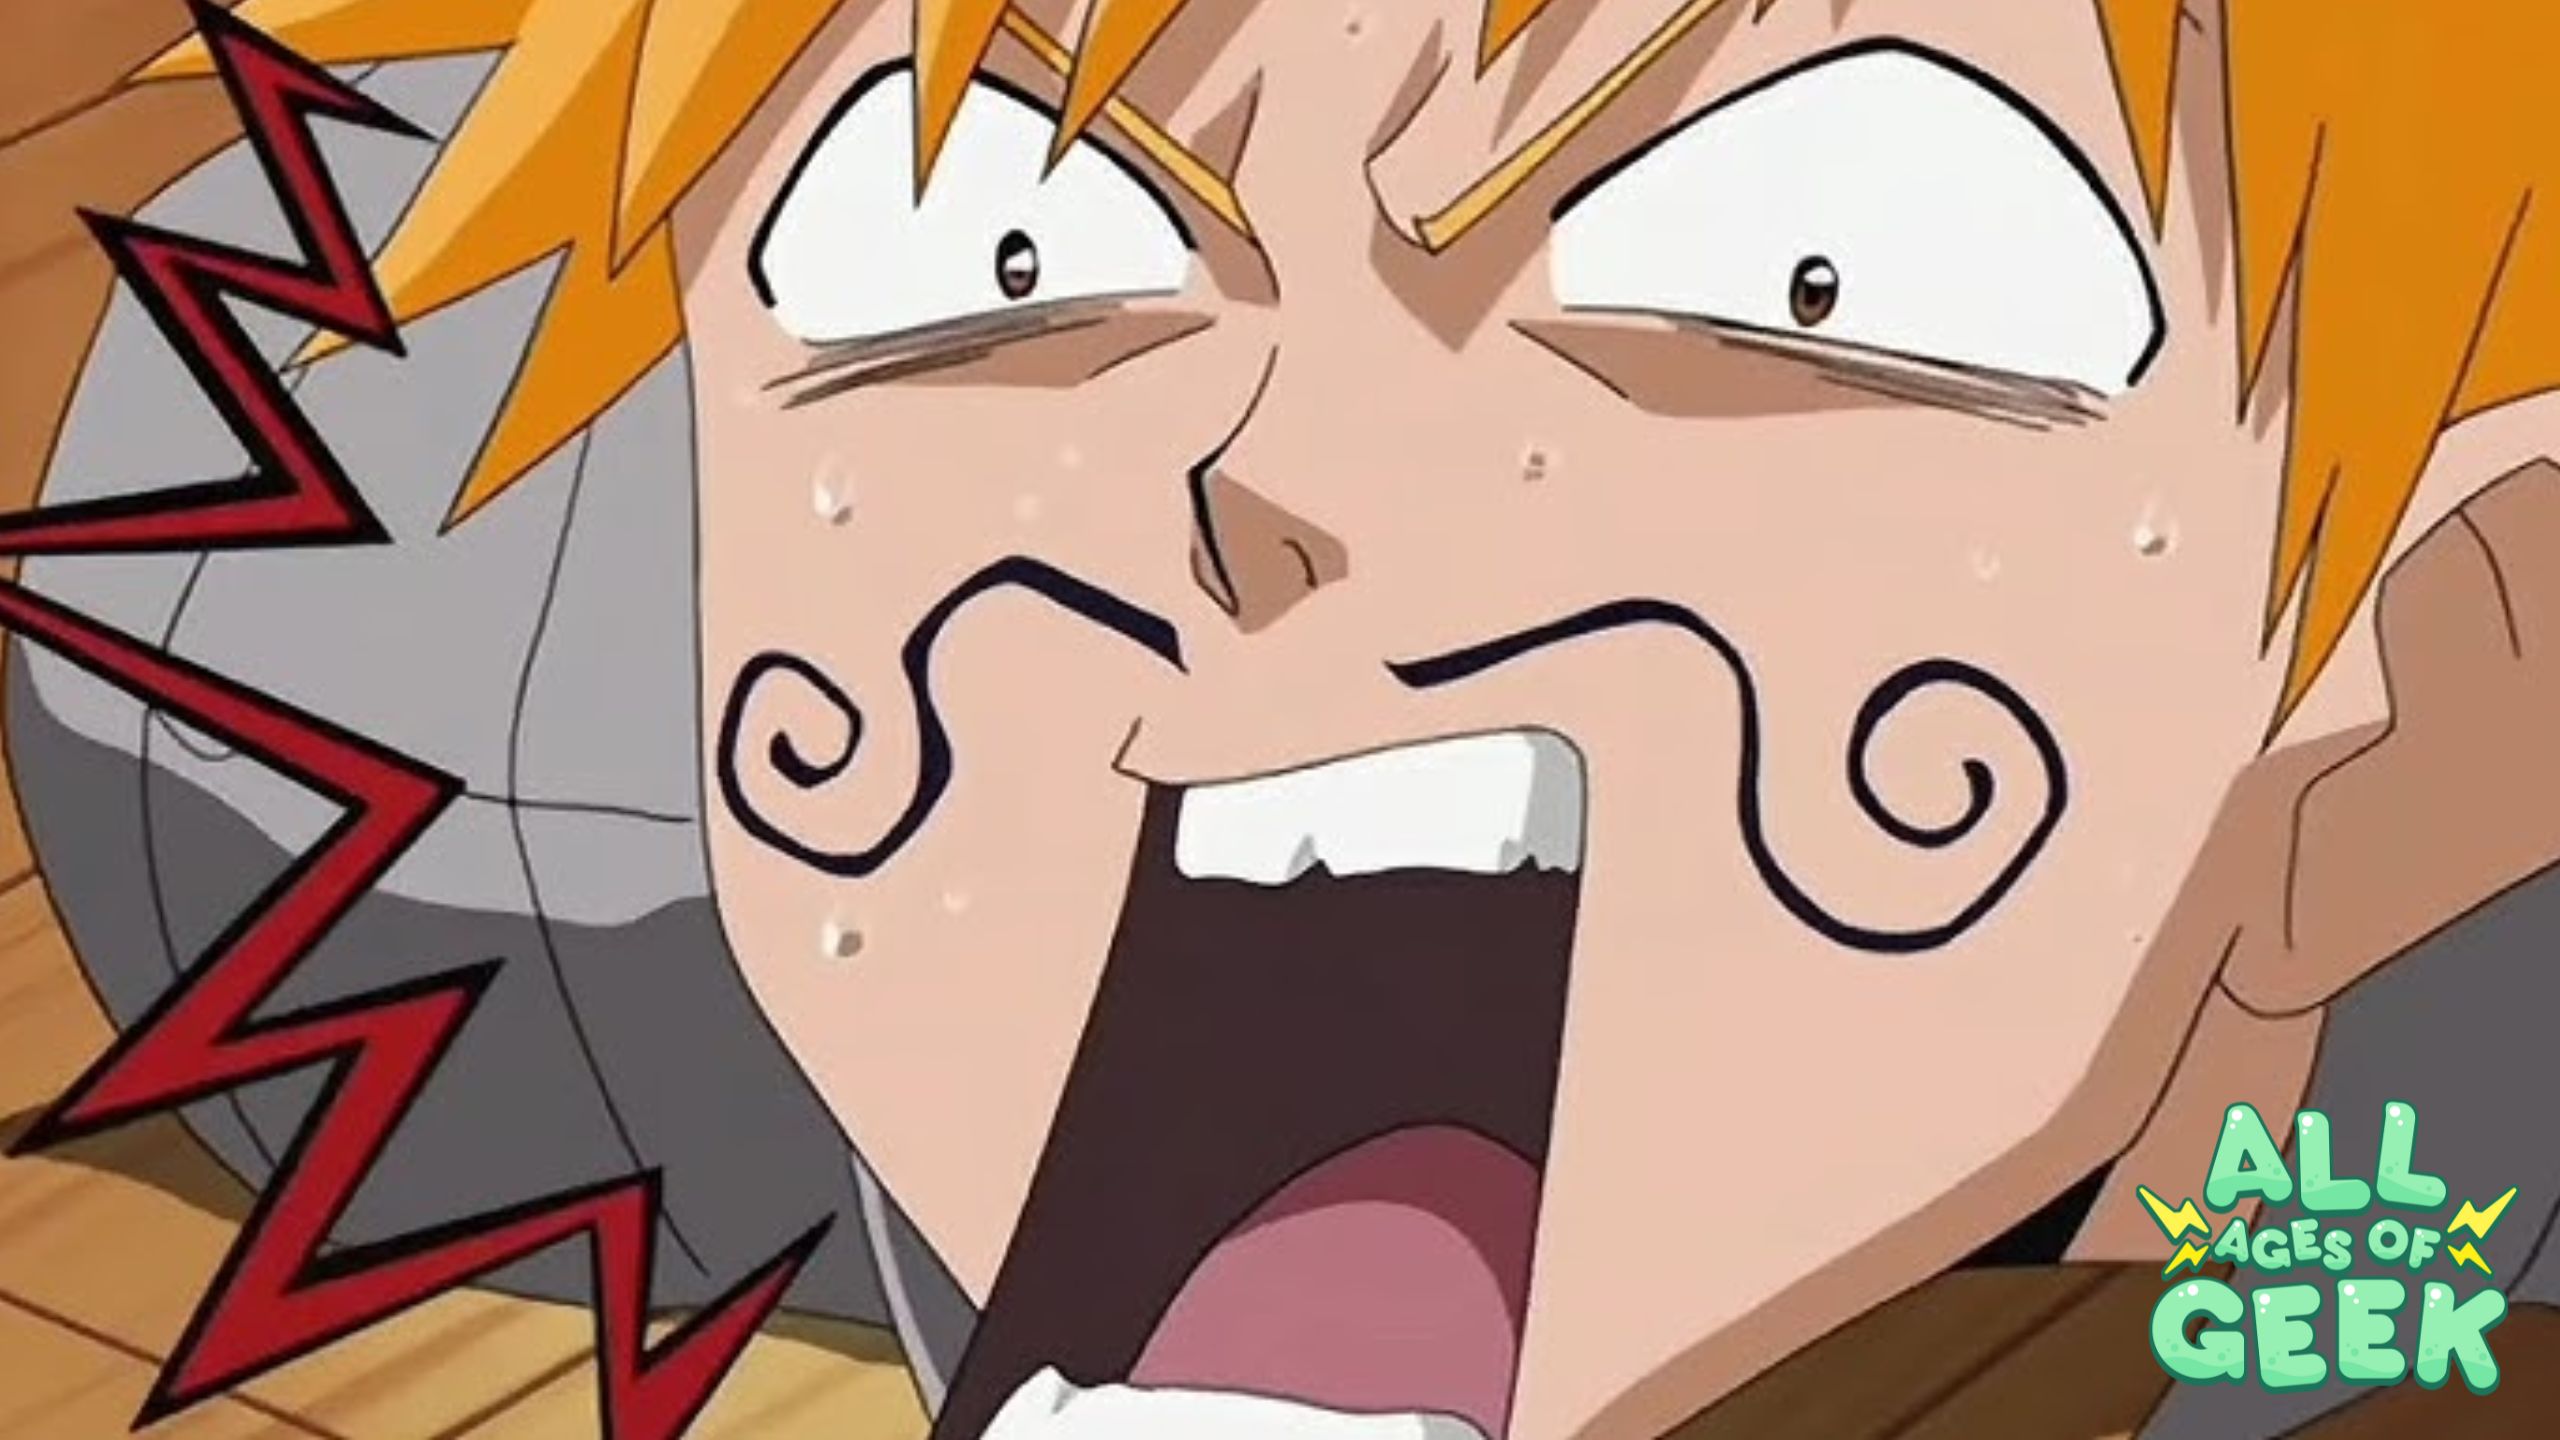 A close-up image of Ichigo Kurosaki from Bleach, displaying a comical and exaggerated expression with a swirly mustache drawn on his face. His eyes are wide open in surprise, and sweat drops are visible on his face. The All Ages of Geek logo is present in the bottom right corner.